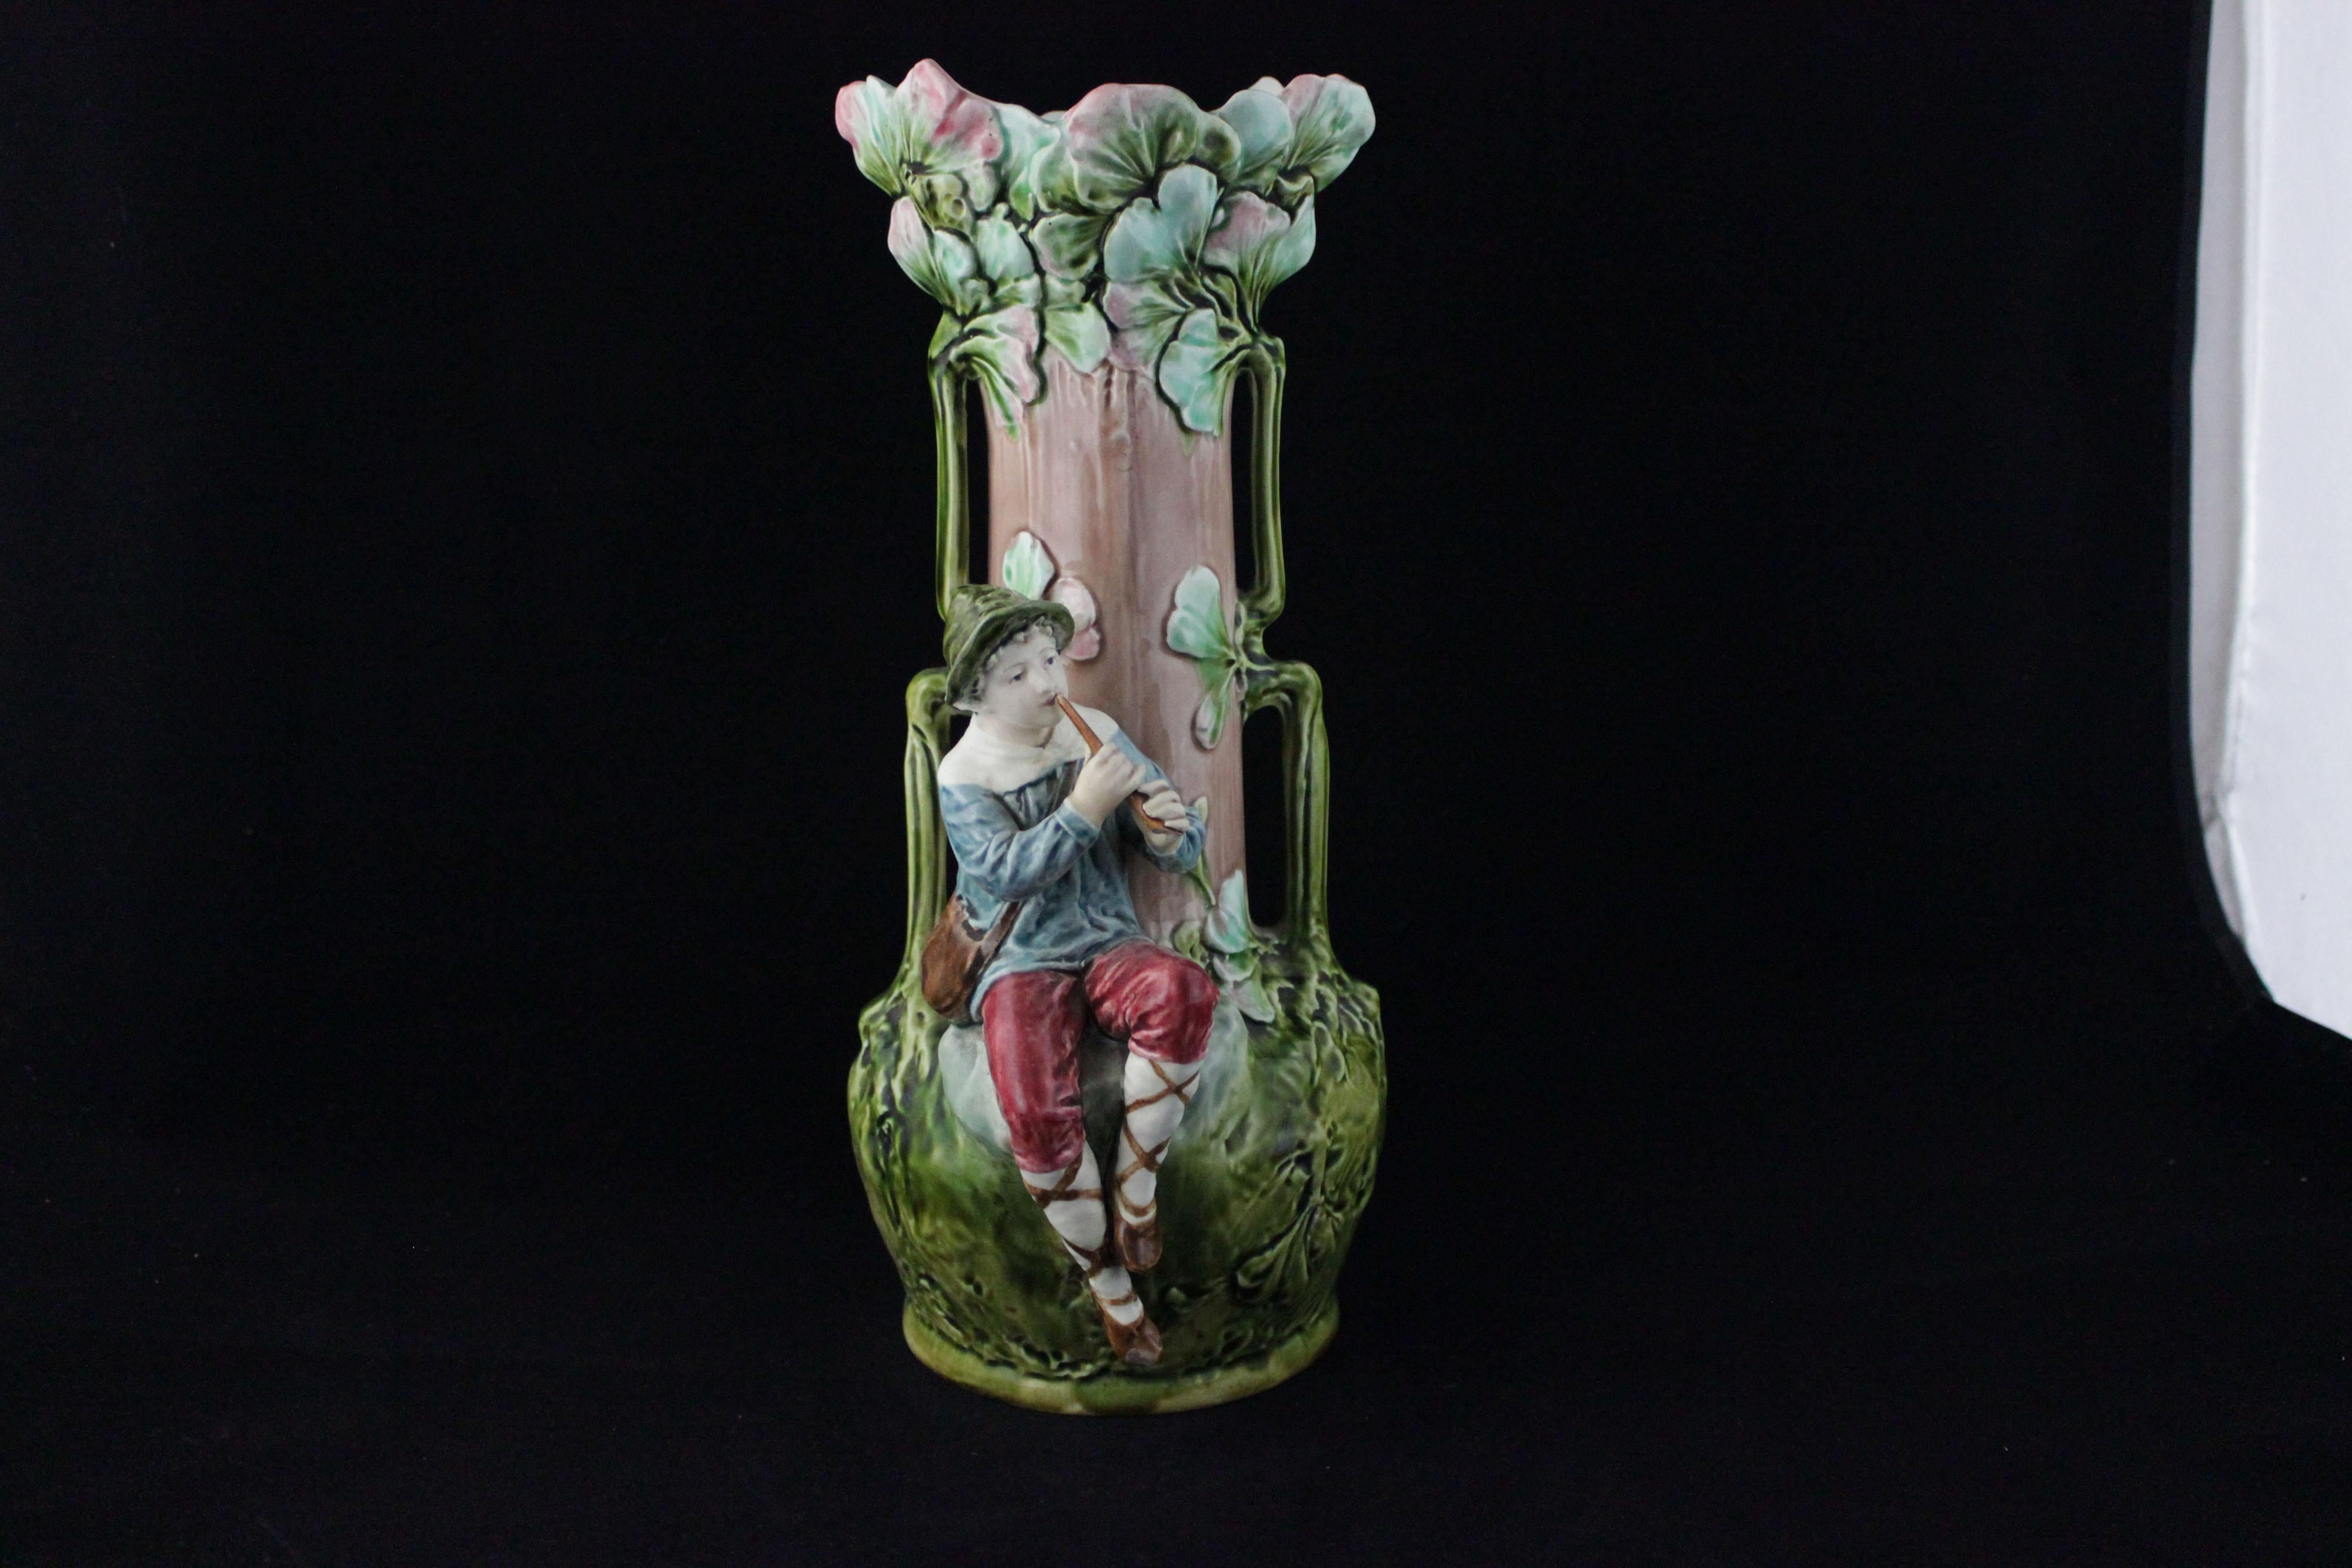 Pair Of Vases With Reliefs Of Children And Foliage In Art Nouveau Style, Early 20th Century.